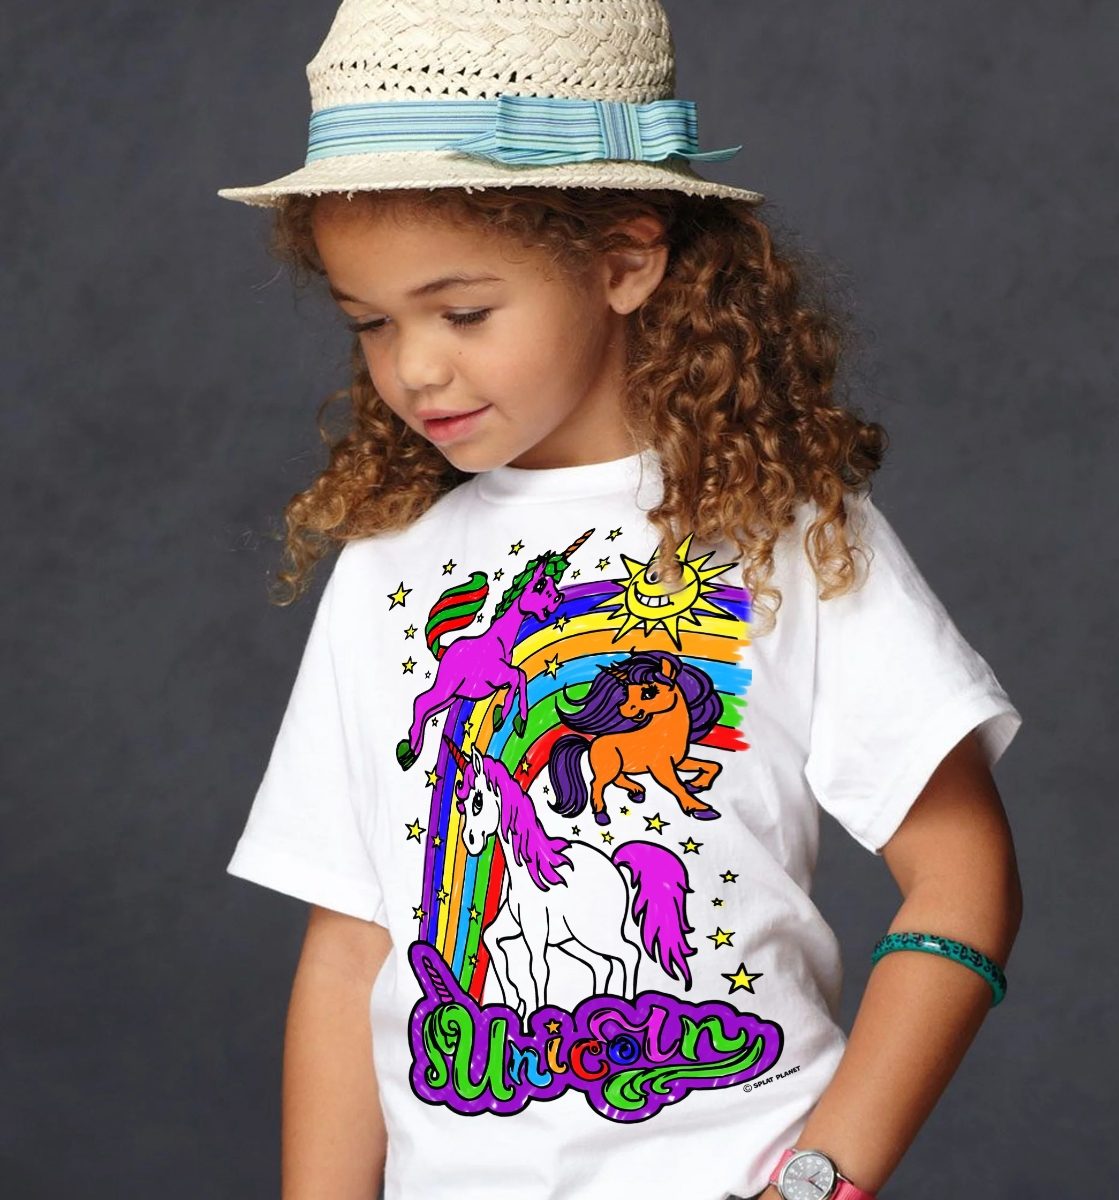 Unicorn Kids Colour In T-Shirt and Colouring Pens Worn